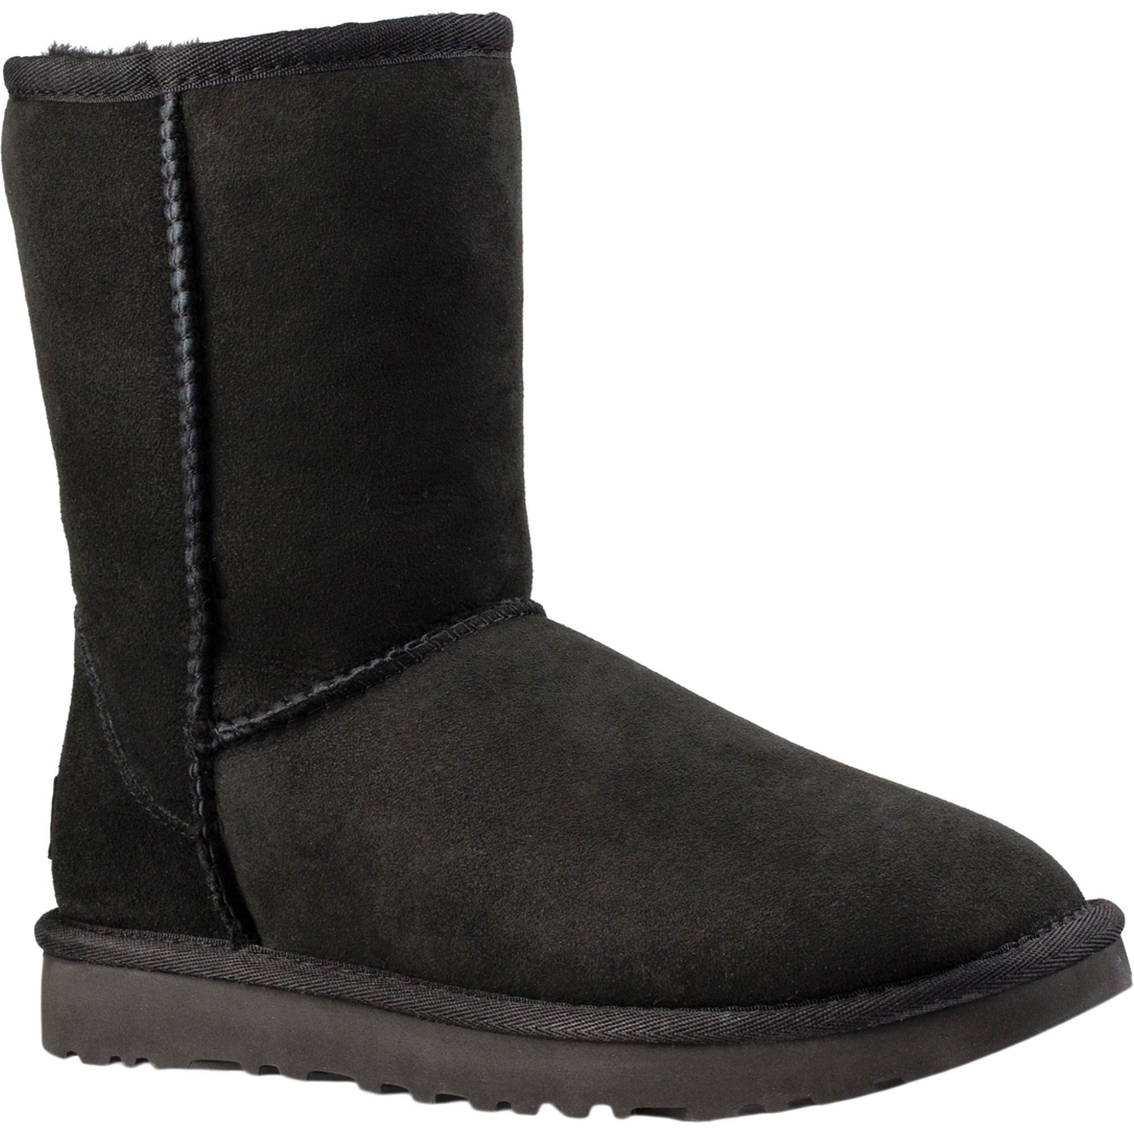 uggs classic short boots on sale